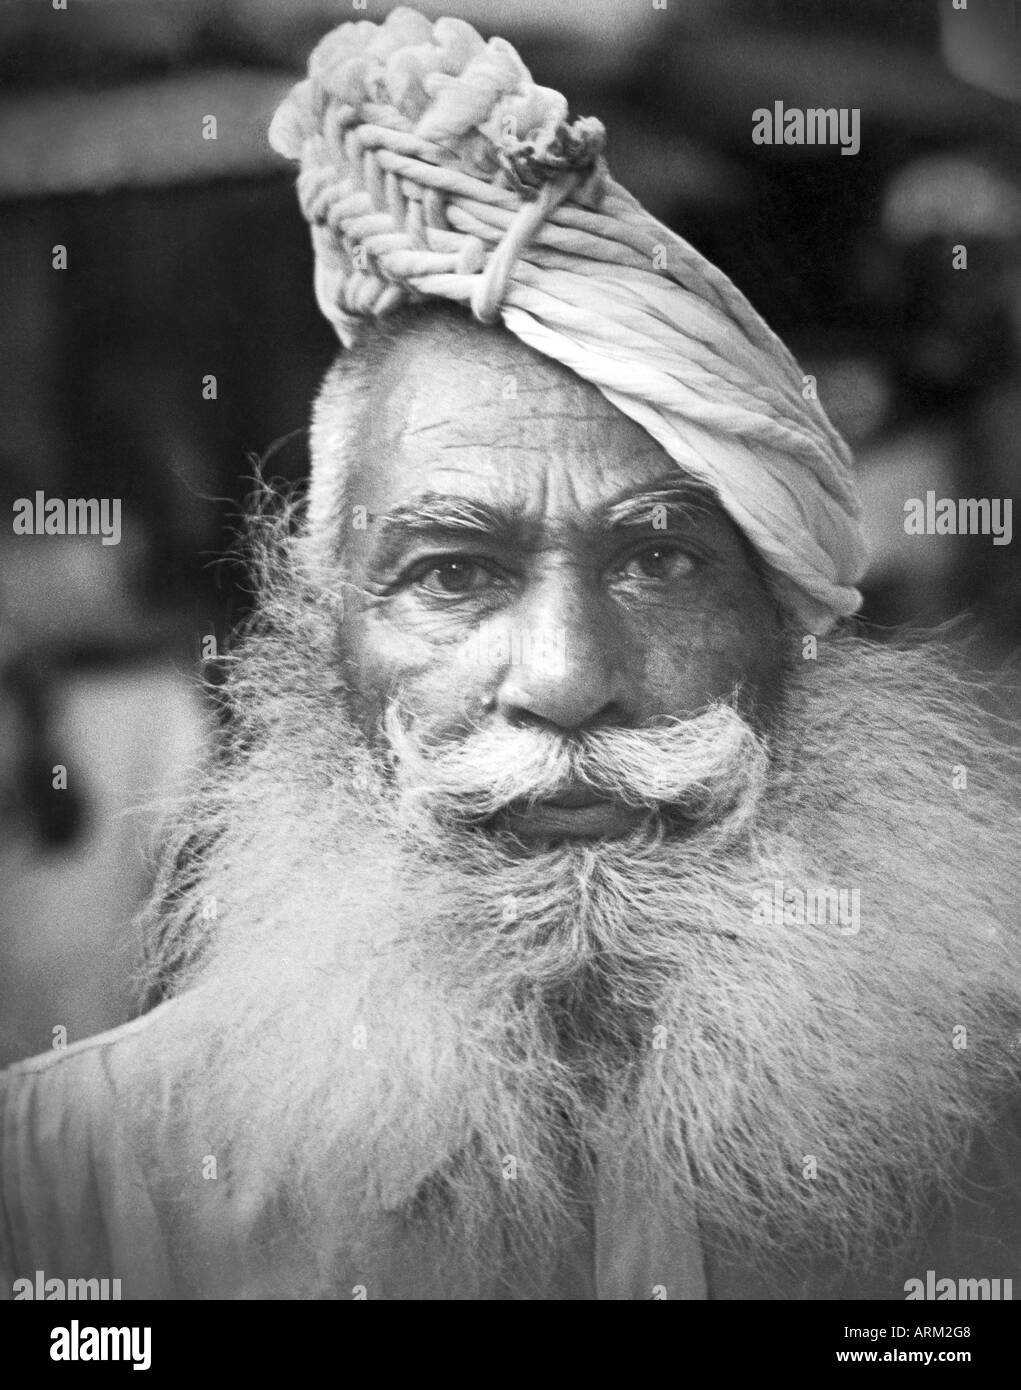 old vintage Portrait of priest from Ayodhya India 1940s Stock Photo